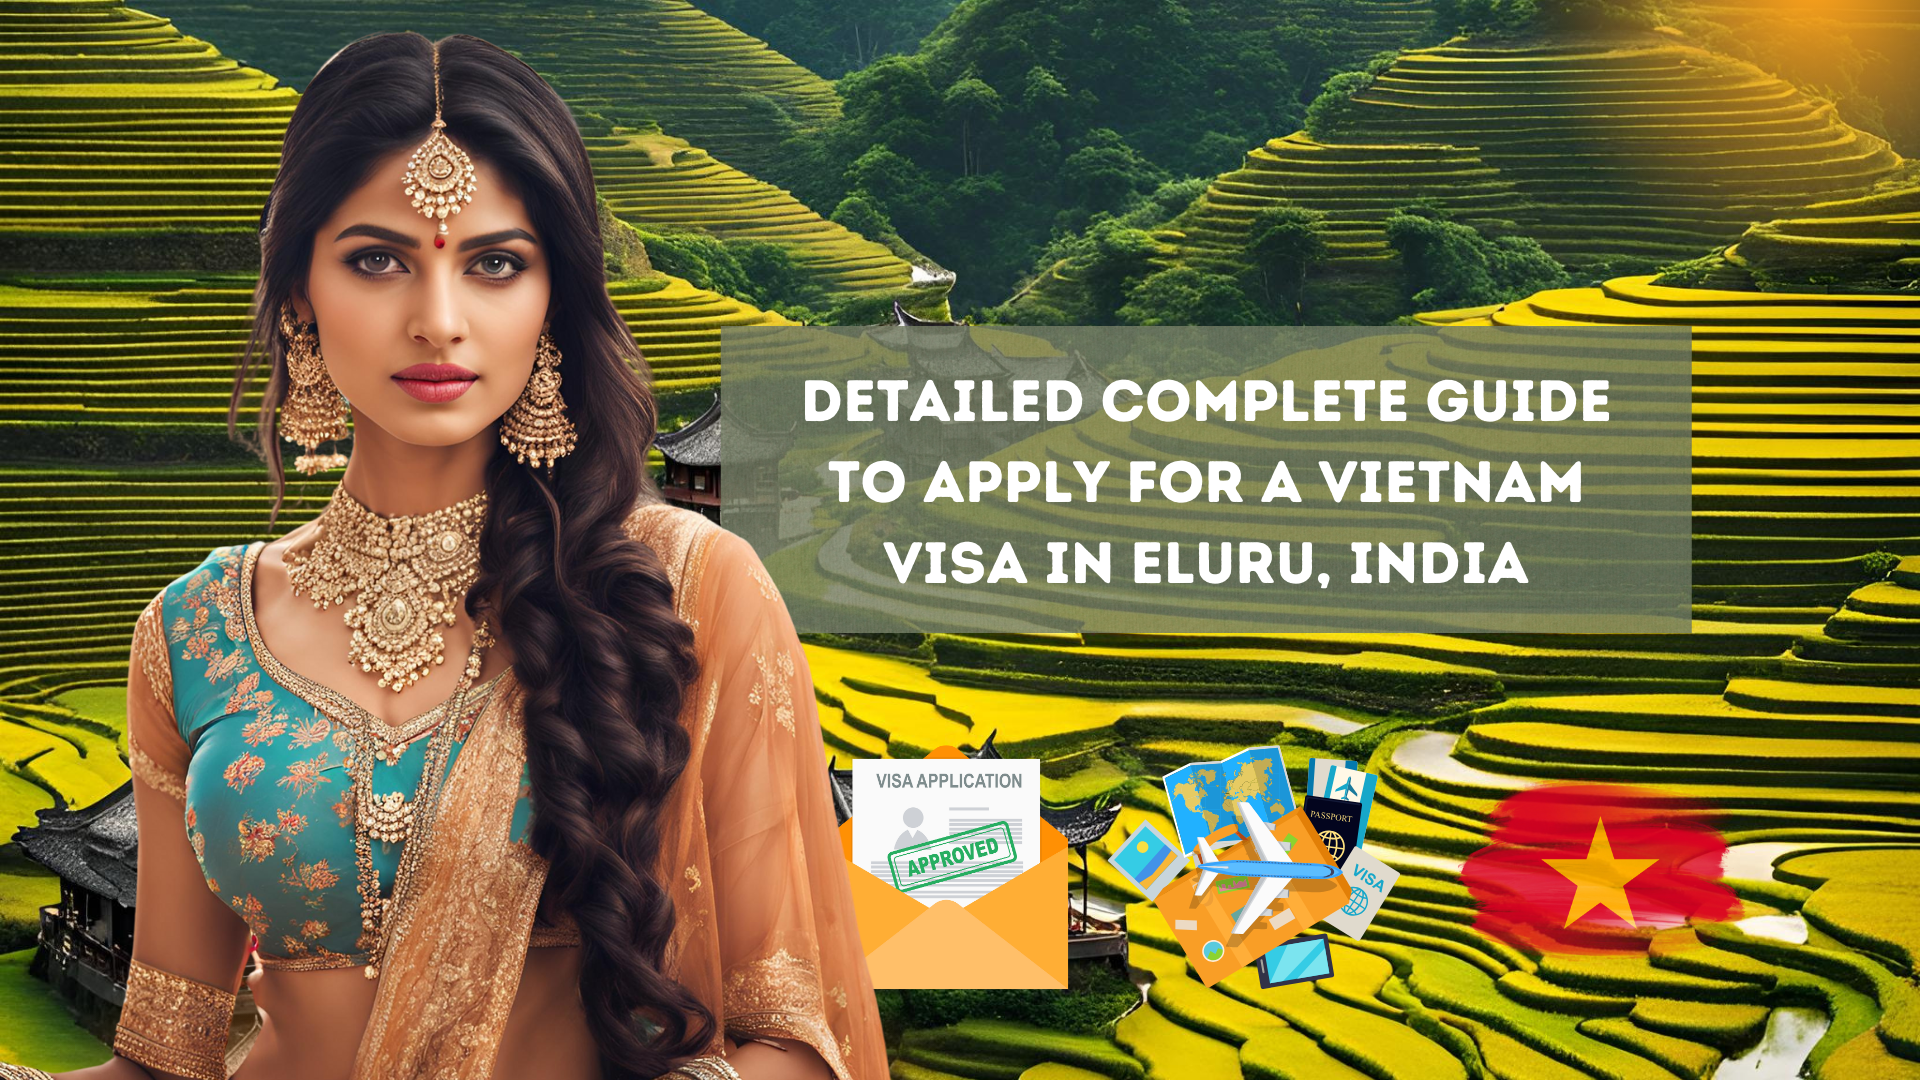 Detailed Complete Guide to Apply for a Vietnam Visa in Eluru, India